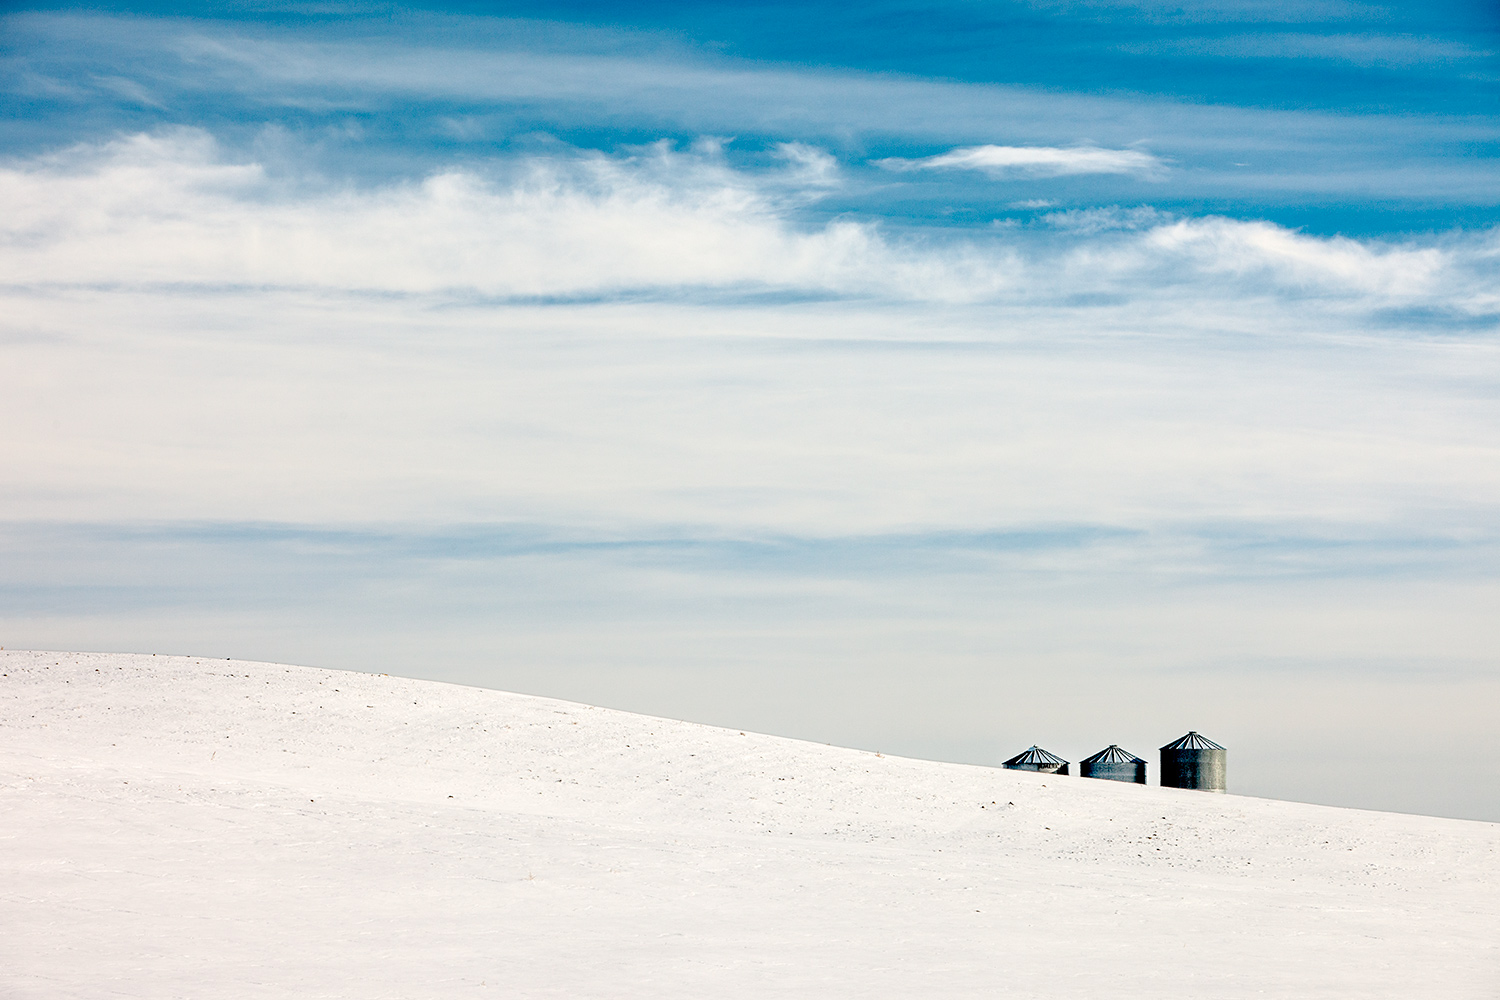 A trio of grain bins lurk over the horizon on what is an otherwise bleak, snowy landscape near Big Sandy, Montana.&nbsp;→ Buy a Print&nbsp;or License Photo